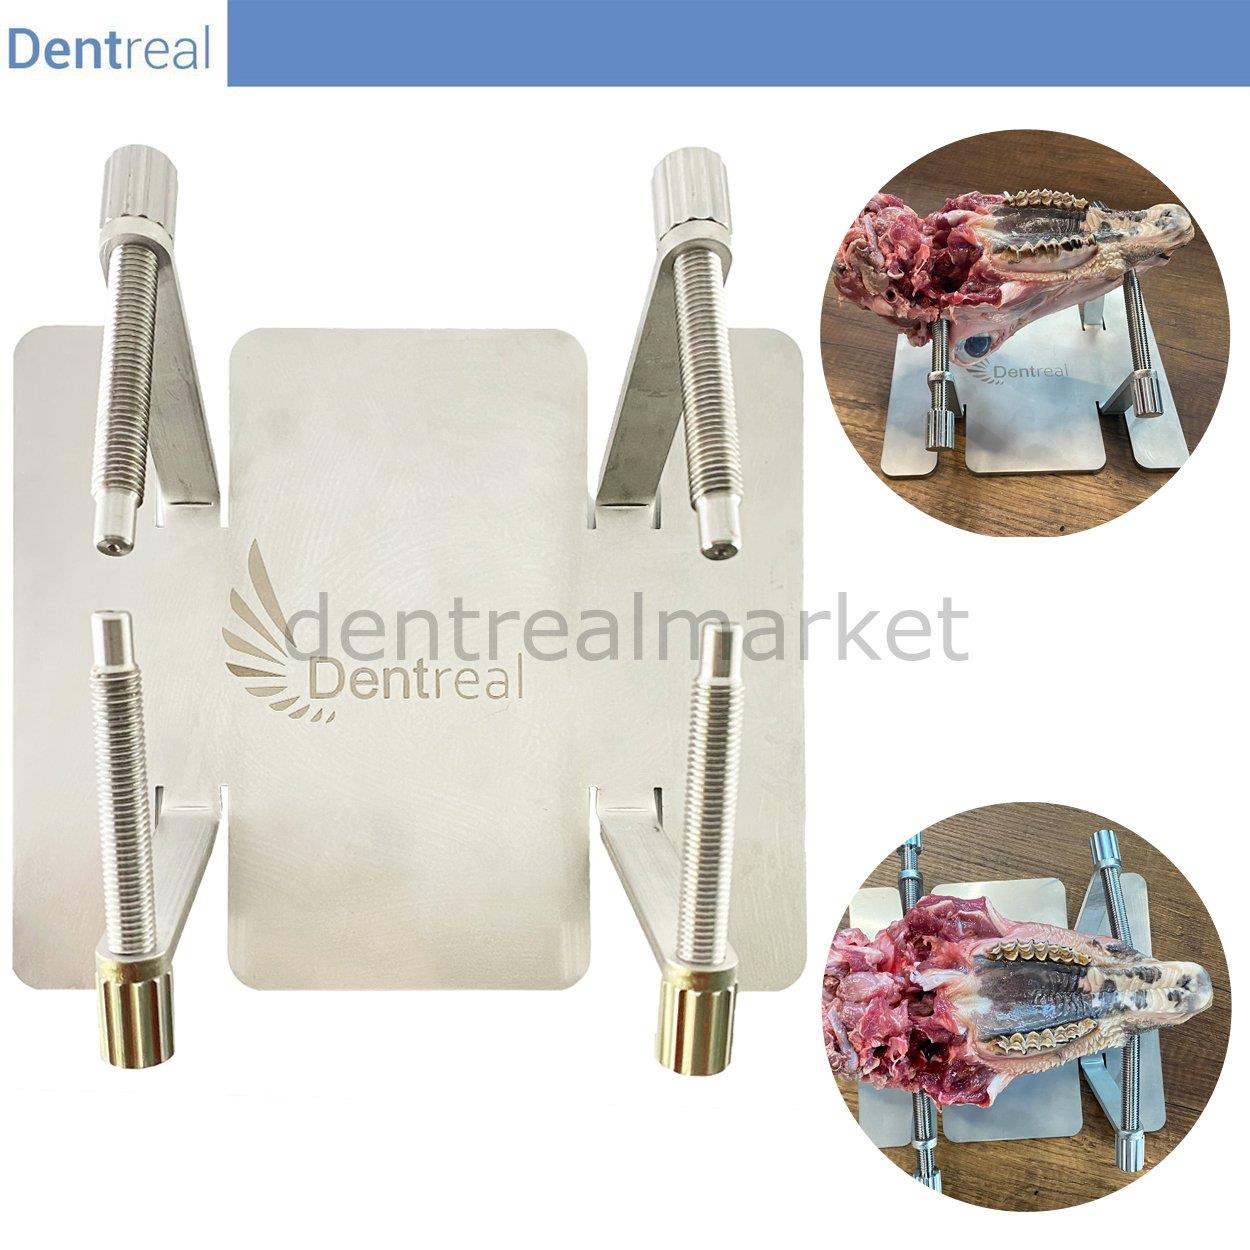 DentrealStore - Dentreal Surgical Training Bench - Surgical Vise - Stainless Steel Surgical Holder